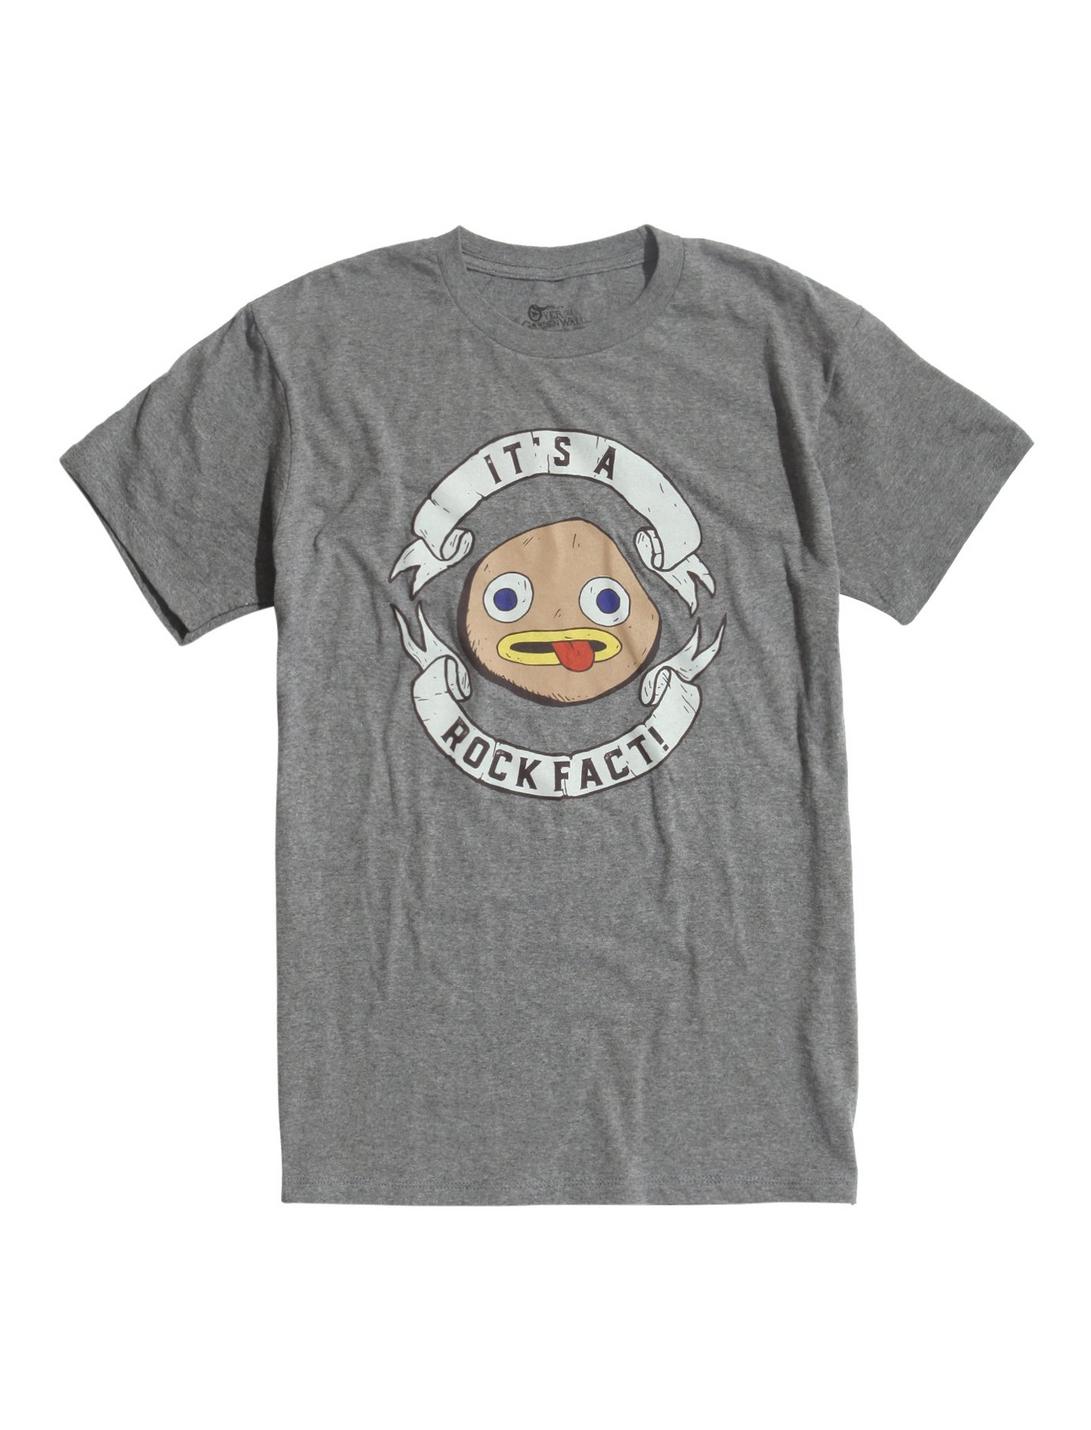 Plus Size Over the Garden Wall It's A Rock Fact T-Shirt, GREY, hi-res